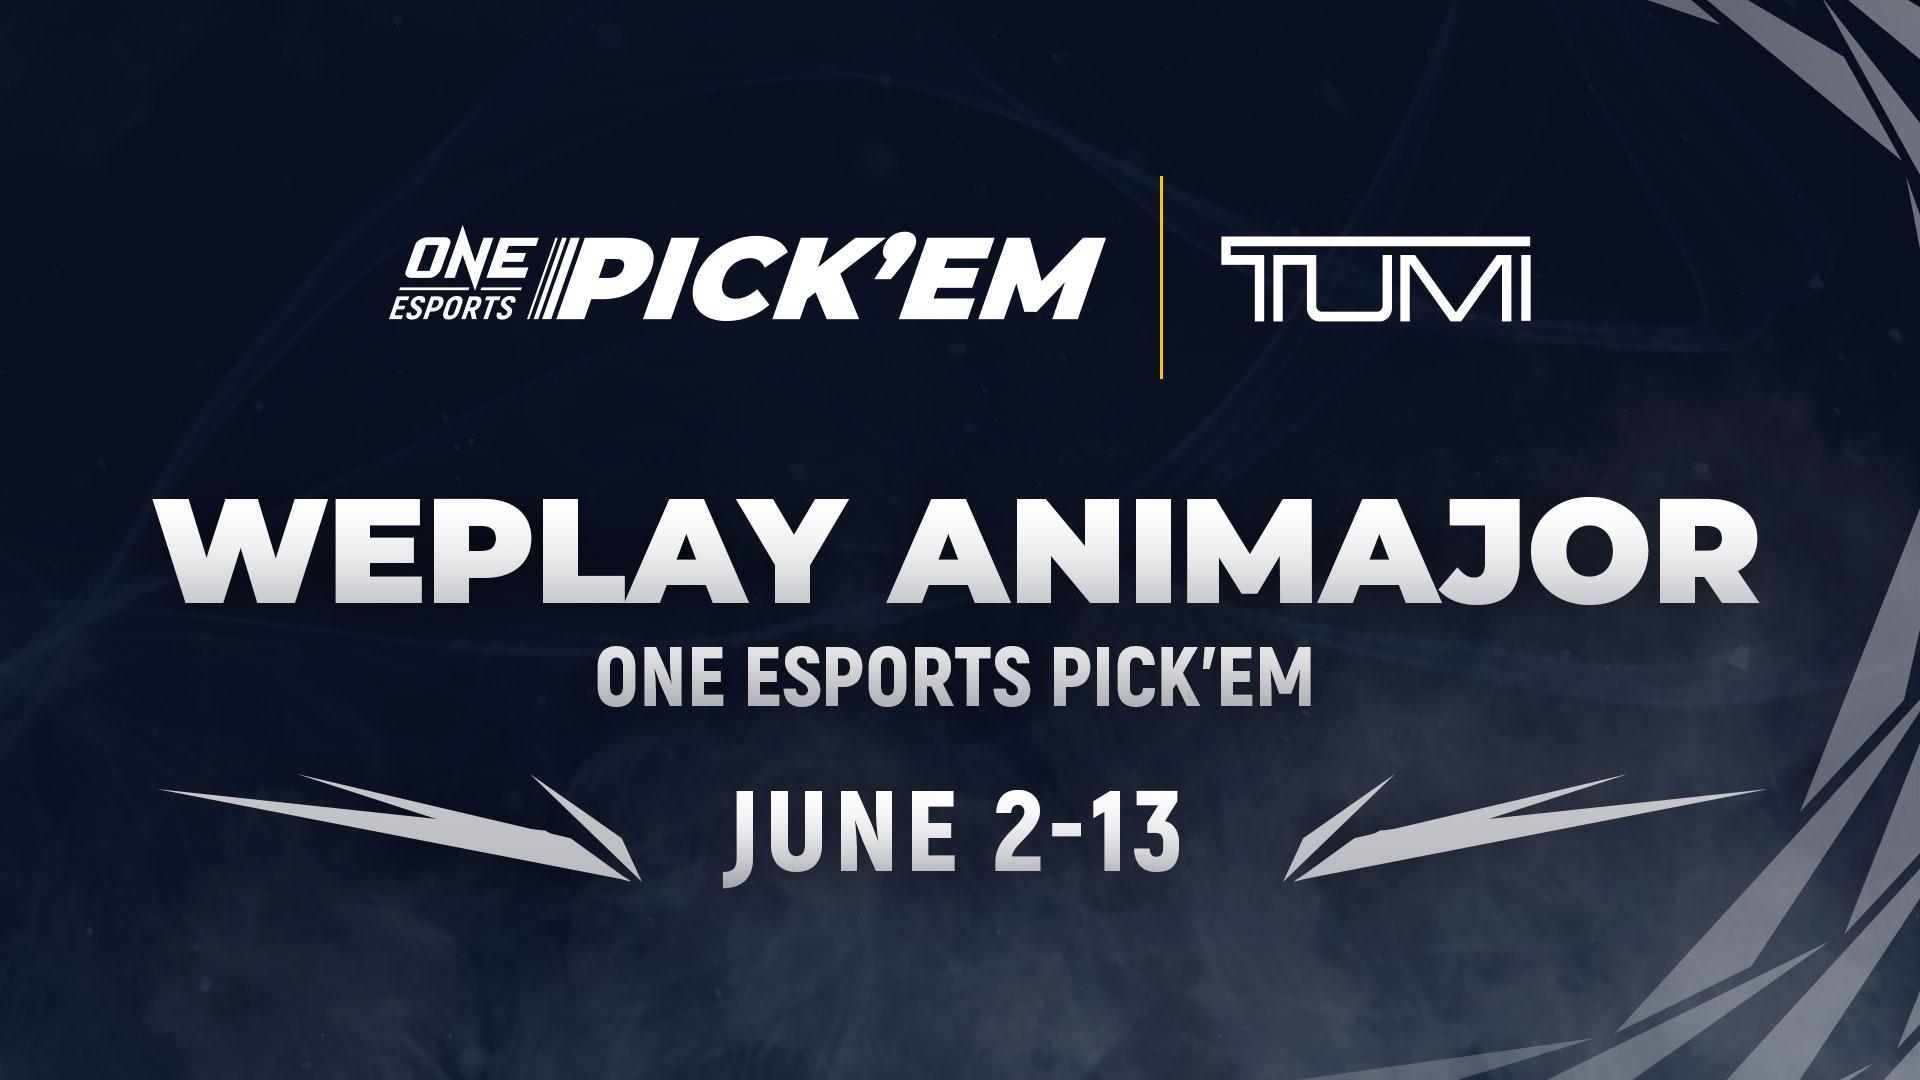 WePlay AniMajor: Results, format, prize pool, where to watch